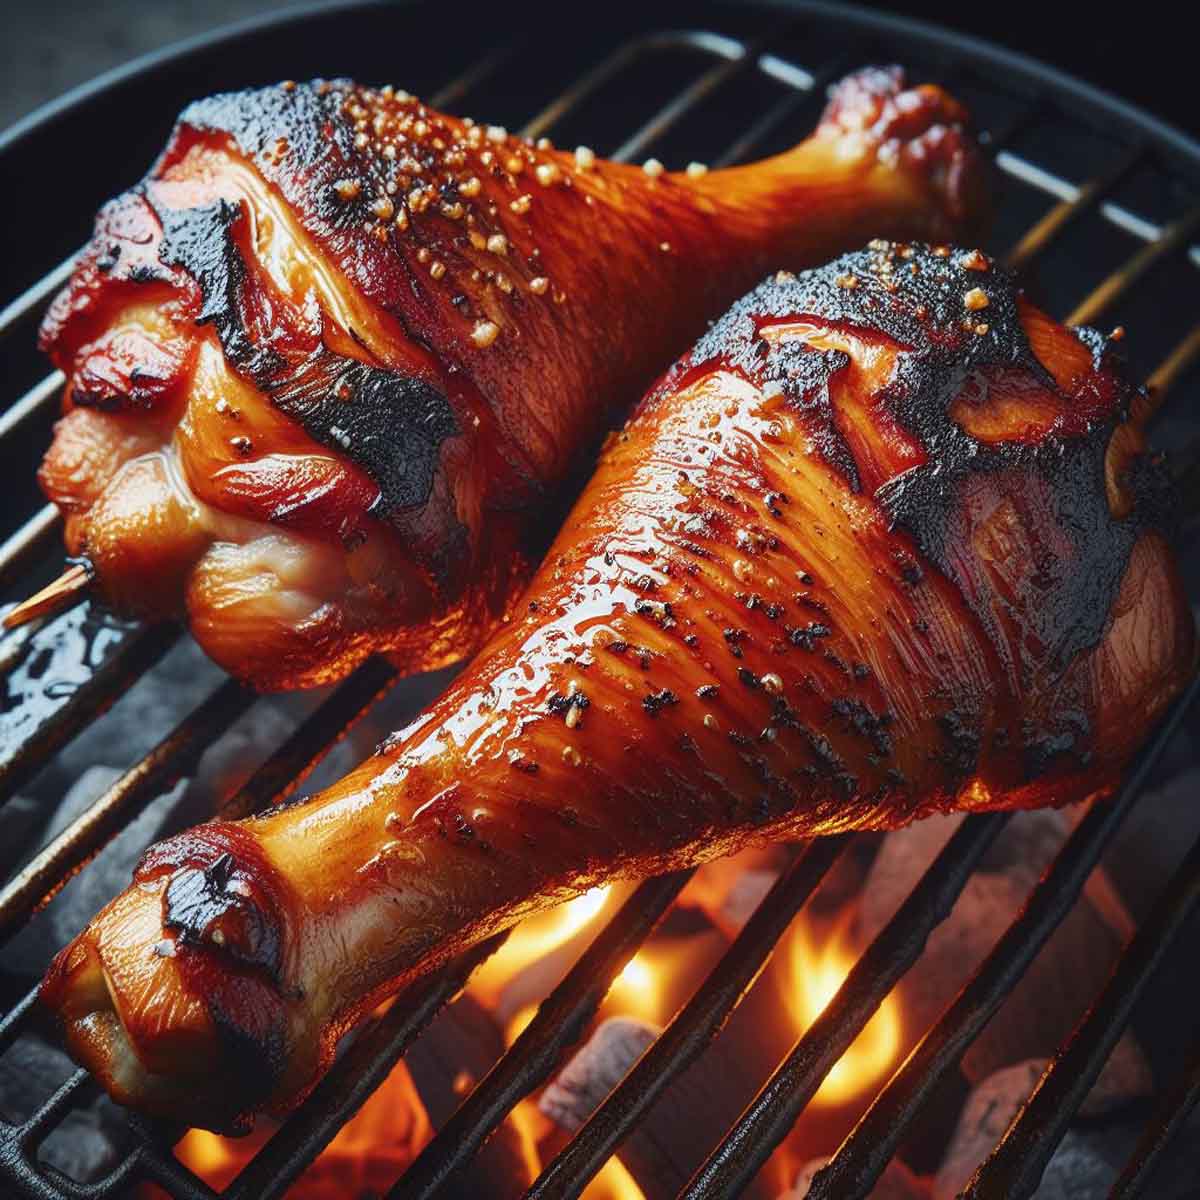 Smoked turkey legs on a grill, being reheated with visible smoke and even heat distribution.